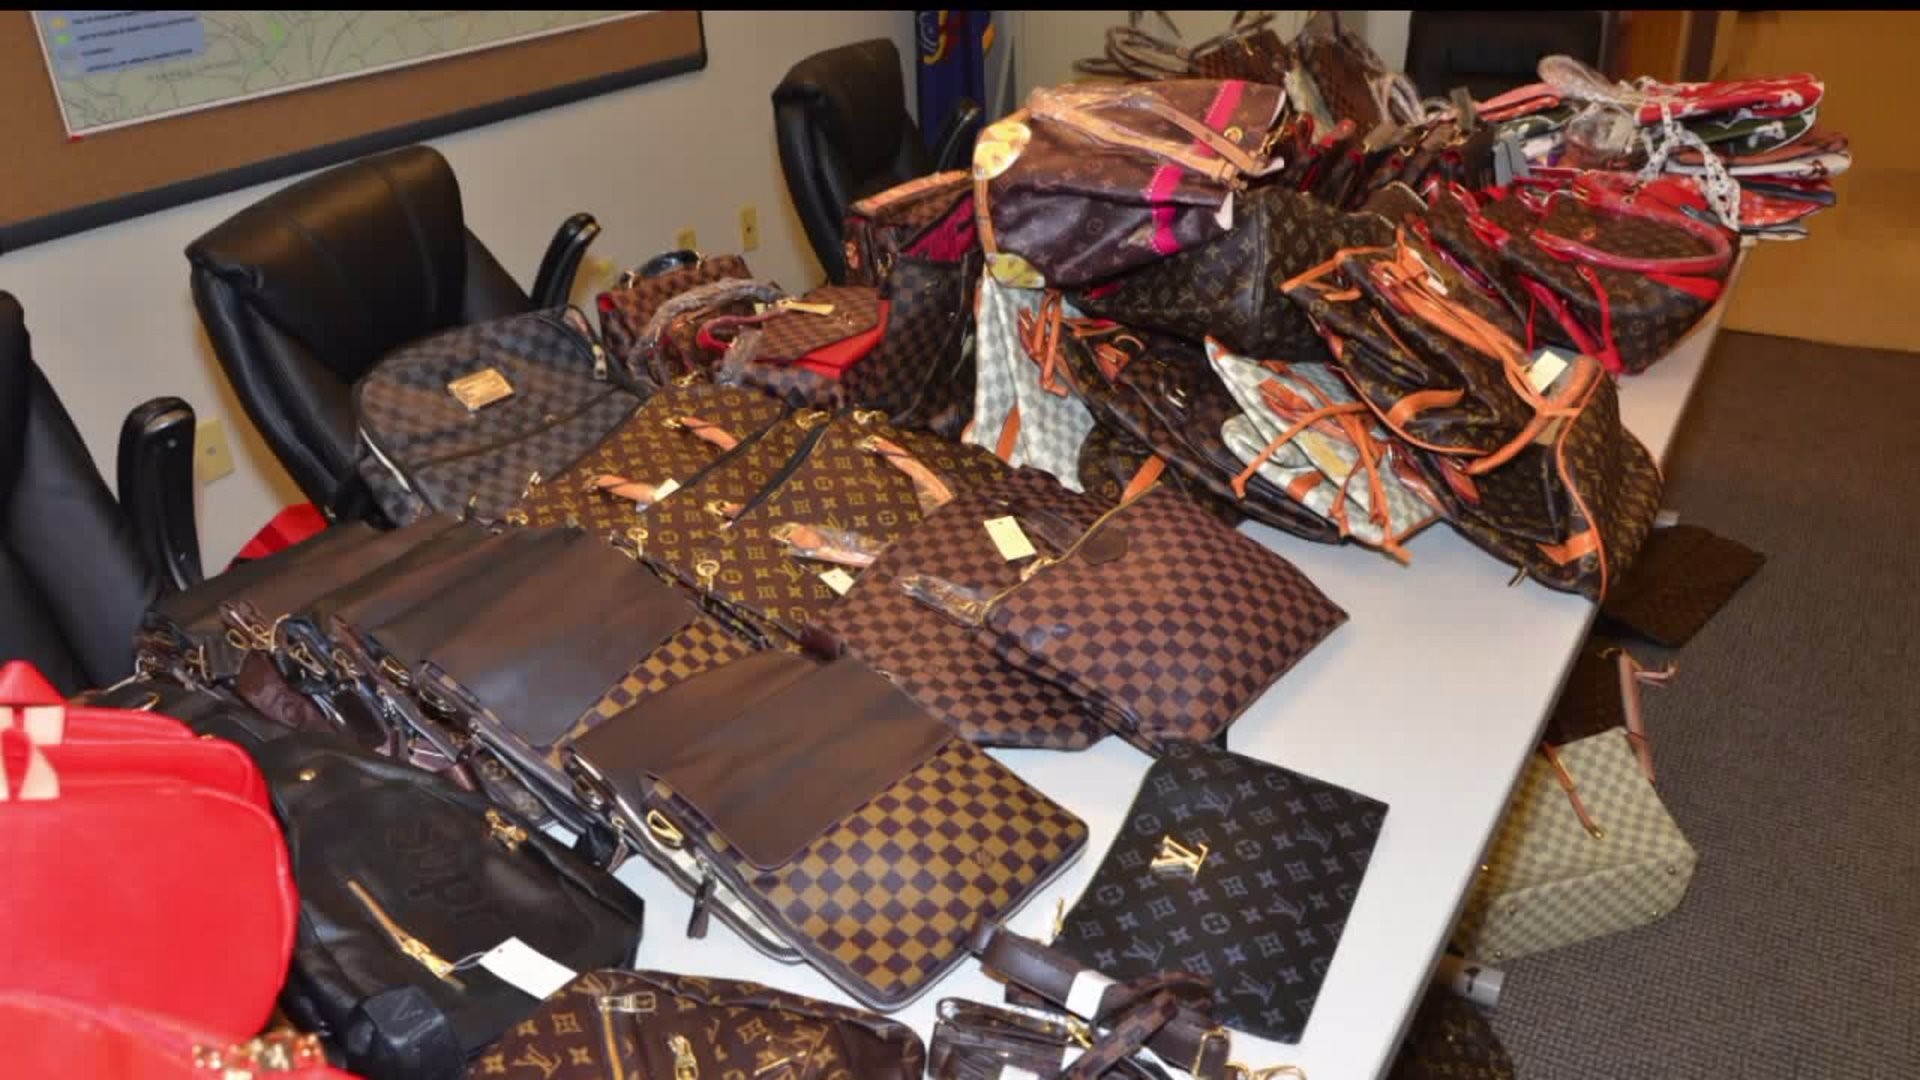 You Like That Fake Louis Vuitton Bag, but Do You Like It Enough to Risk a  Jail Sentence? Buying Fakes Could Soon Be Illegal!